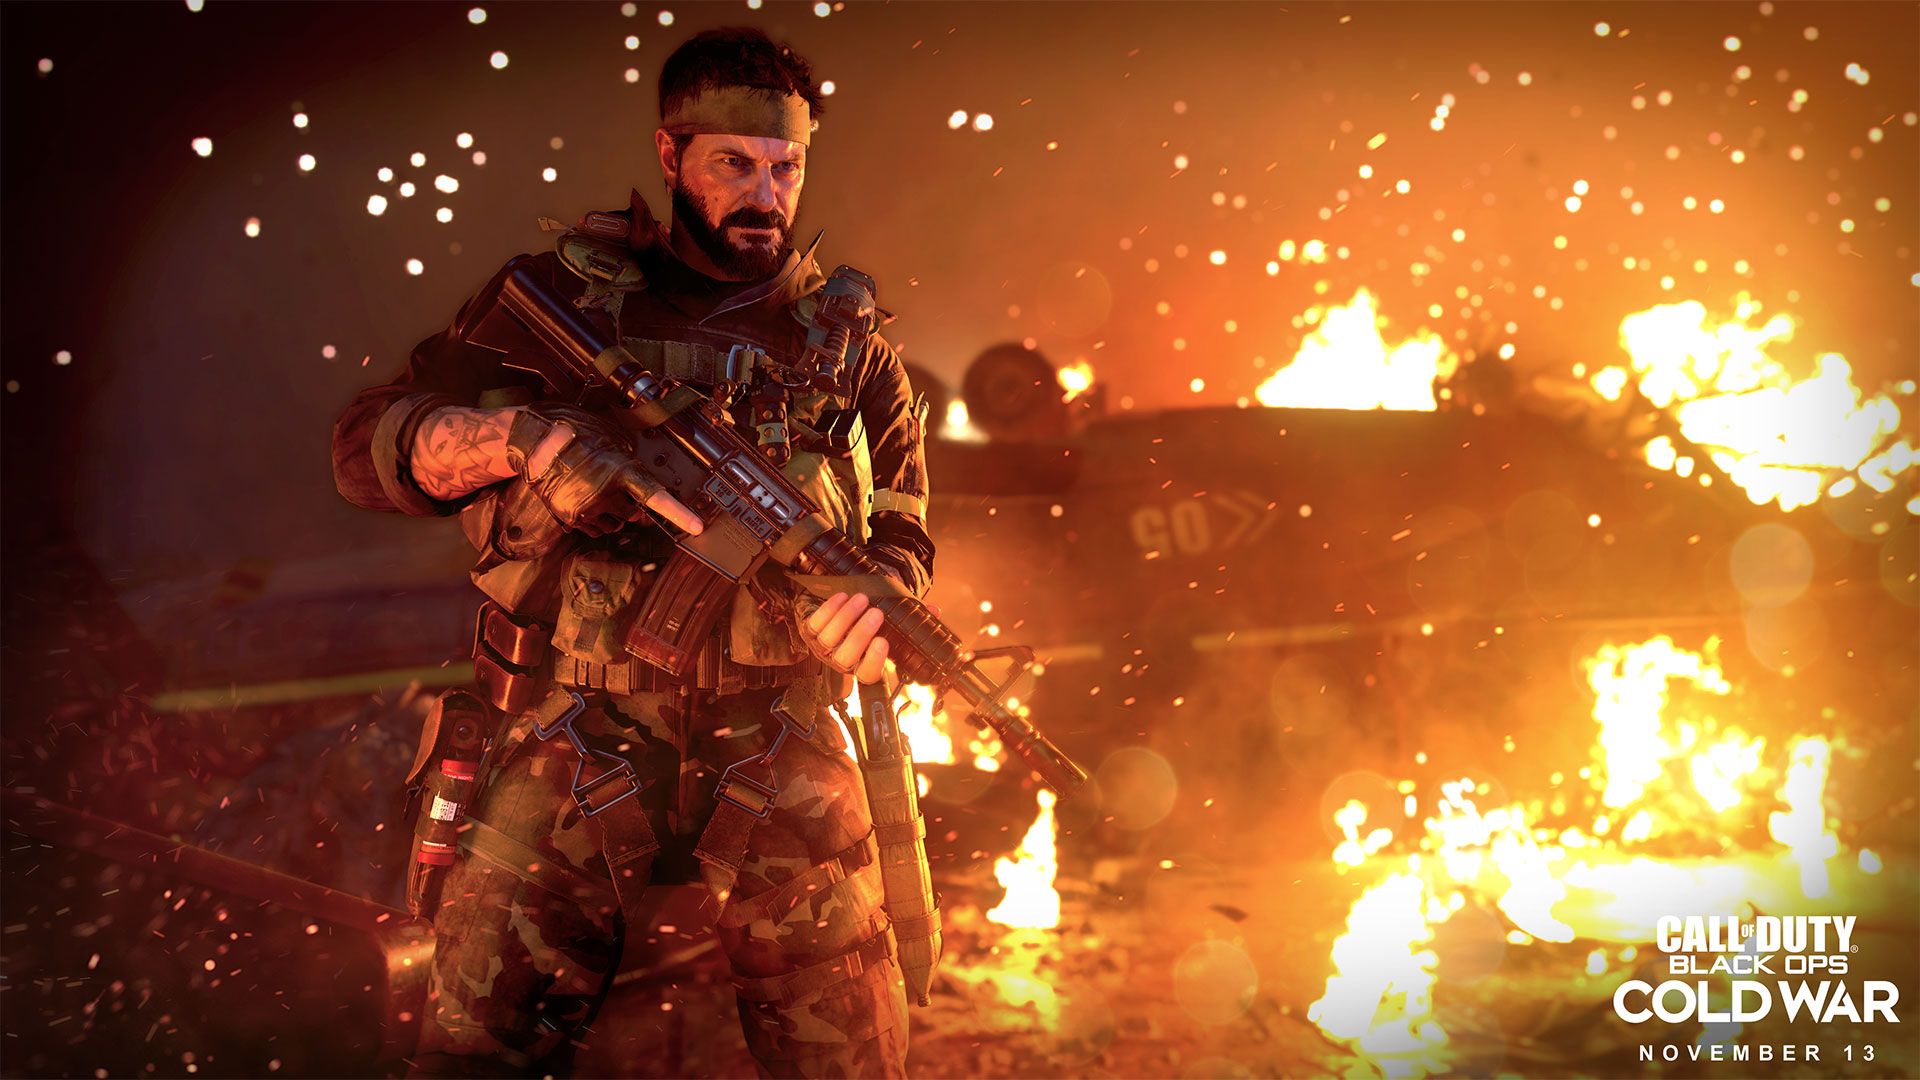 Call of Duty Black Ops: Cold War trailer shows what could've gone wrong in 1981